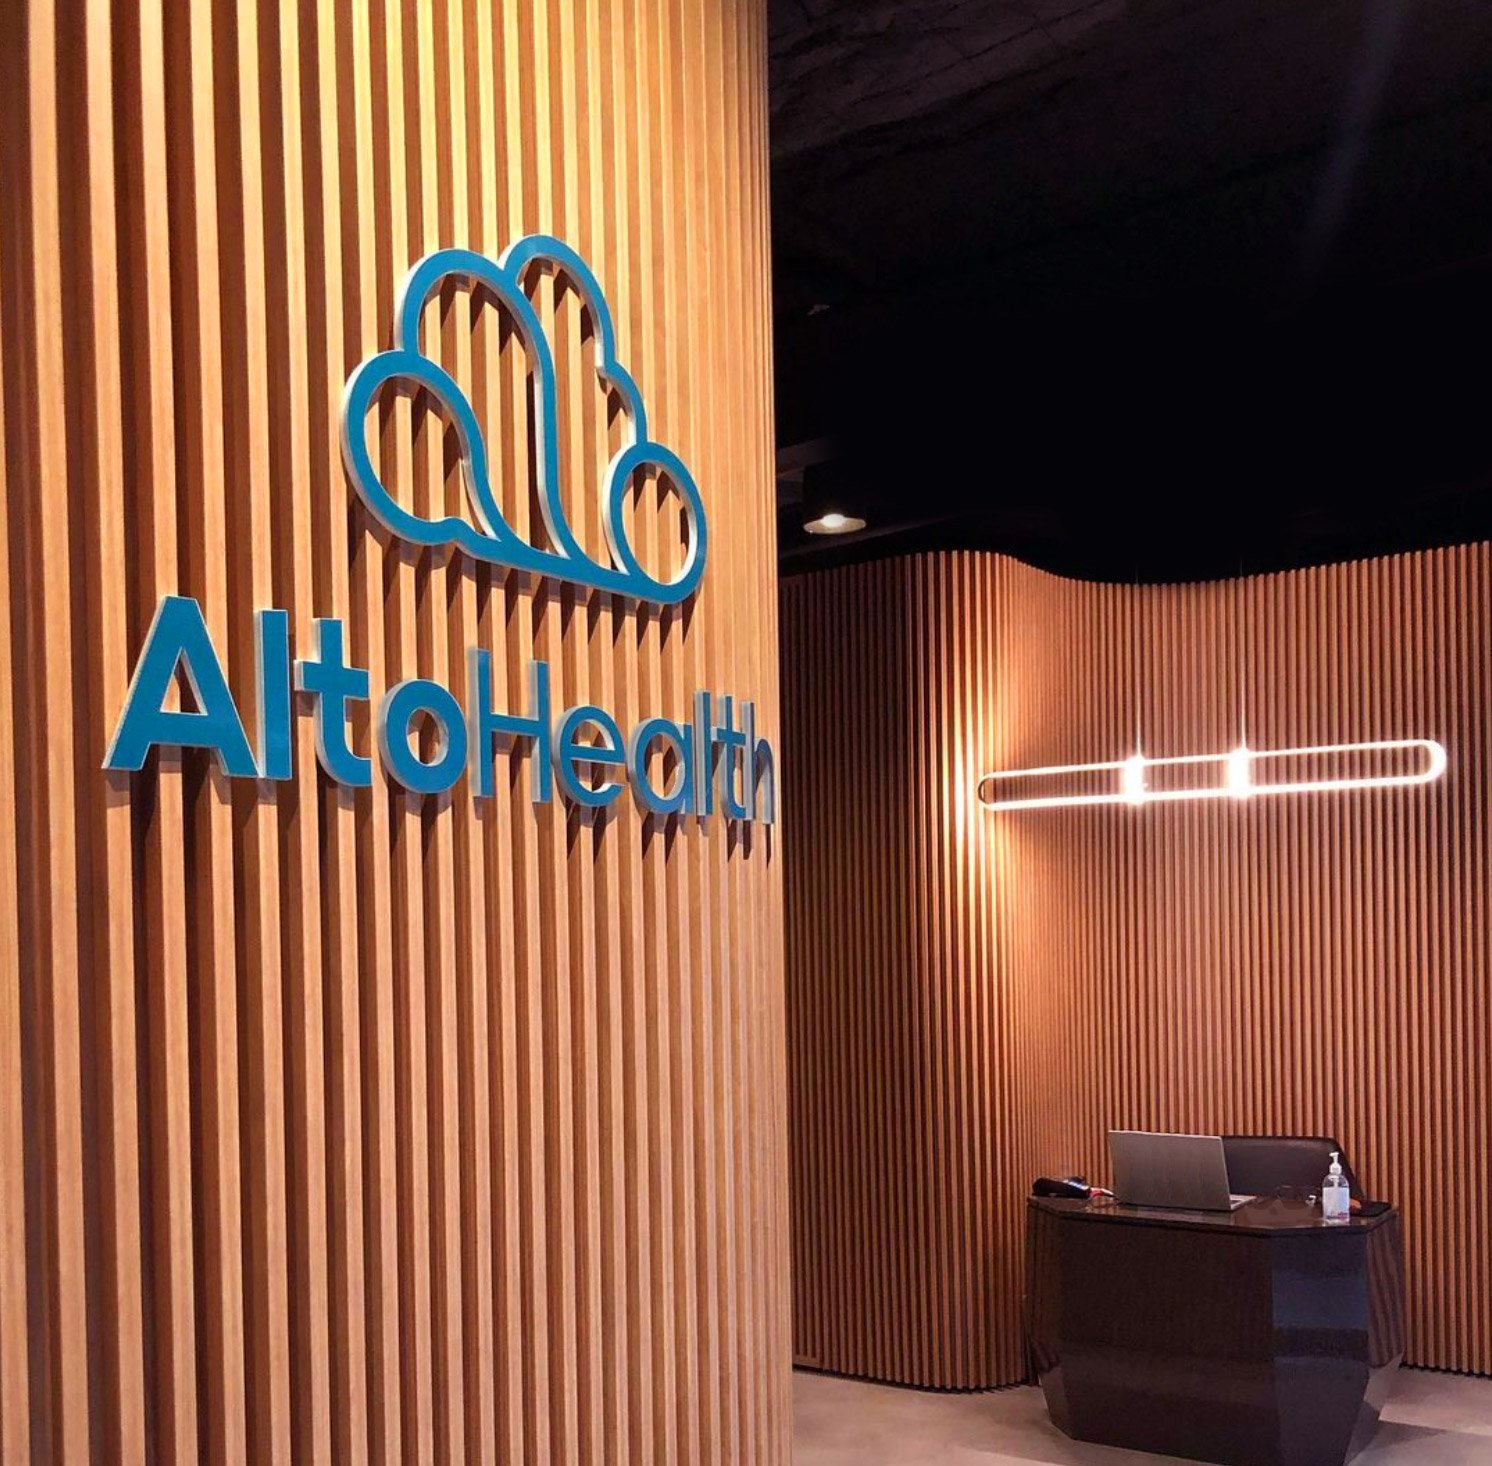 Freelance wayfinding design and signage for Alto Health, the logo is highlighted by lighting on warm timber paneling in the entrance to the business